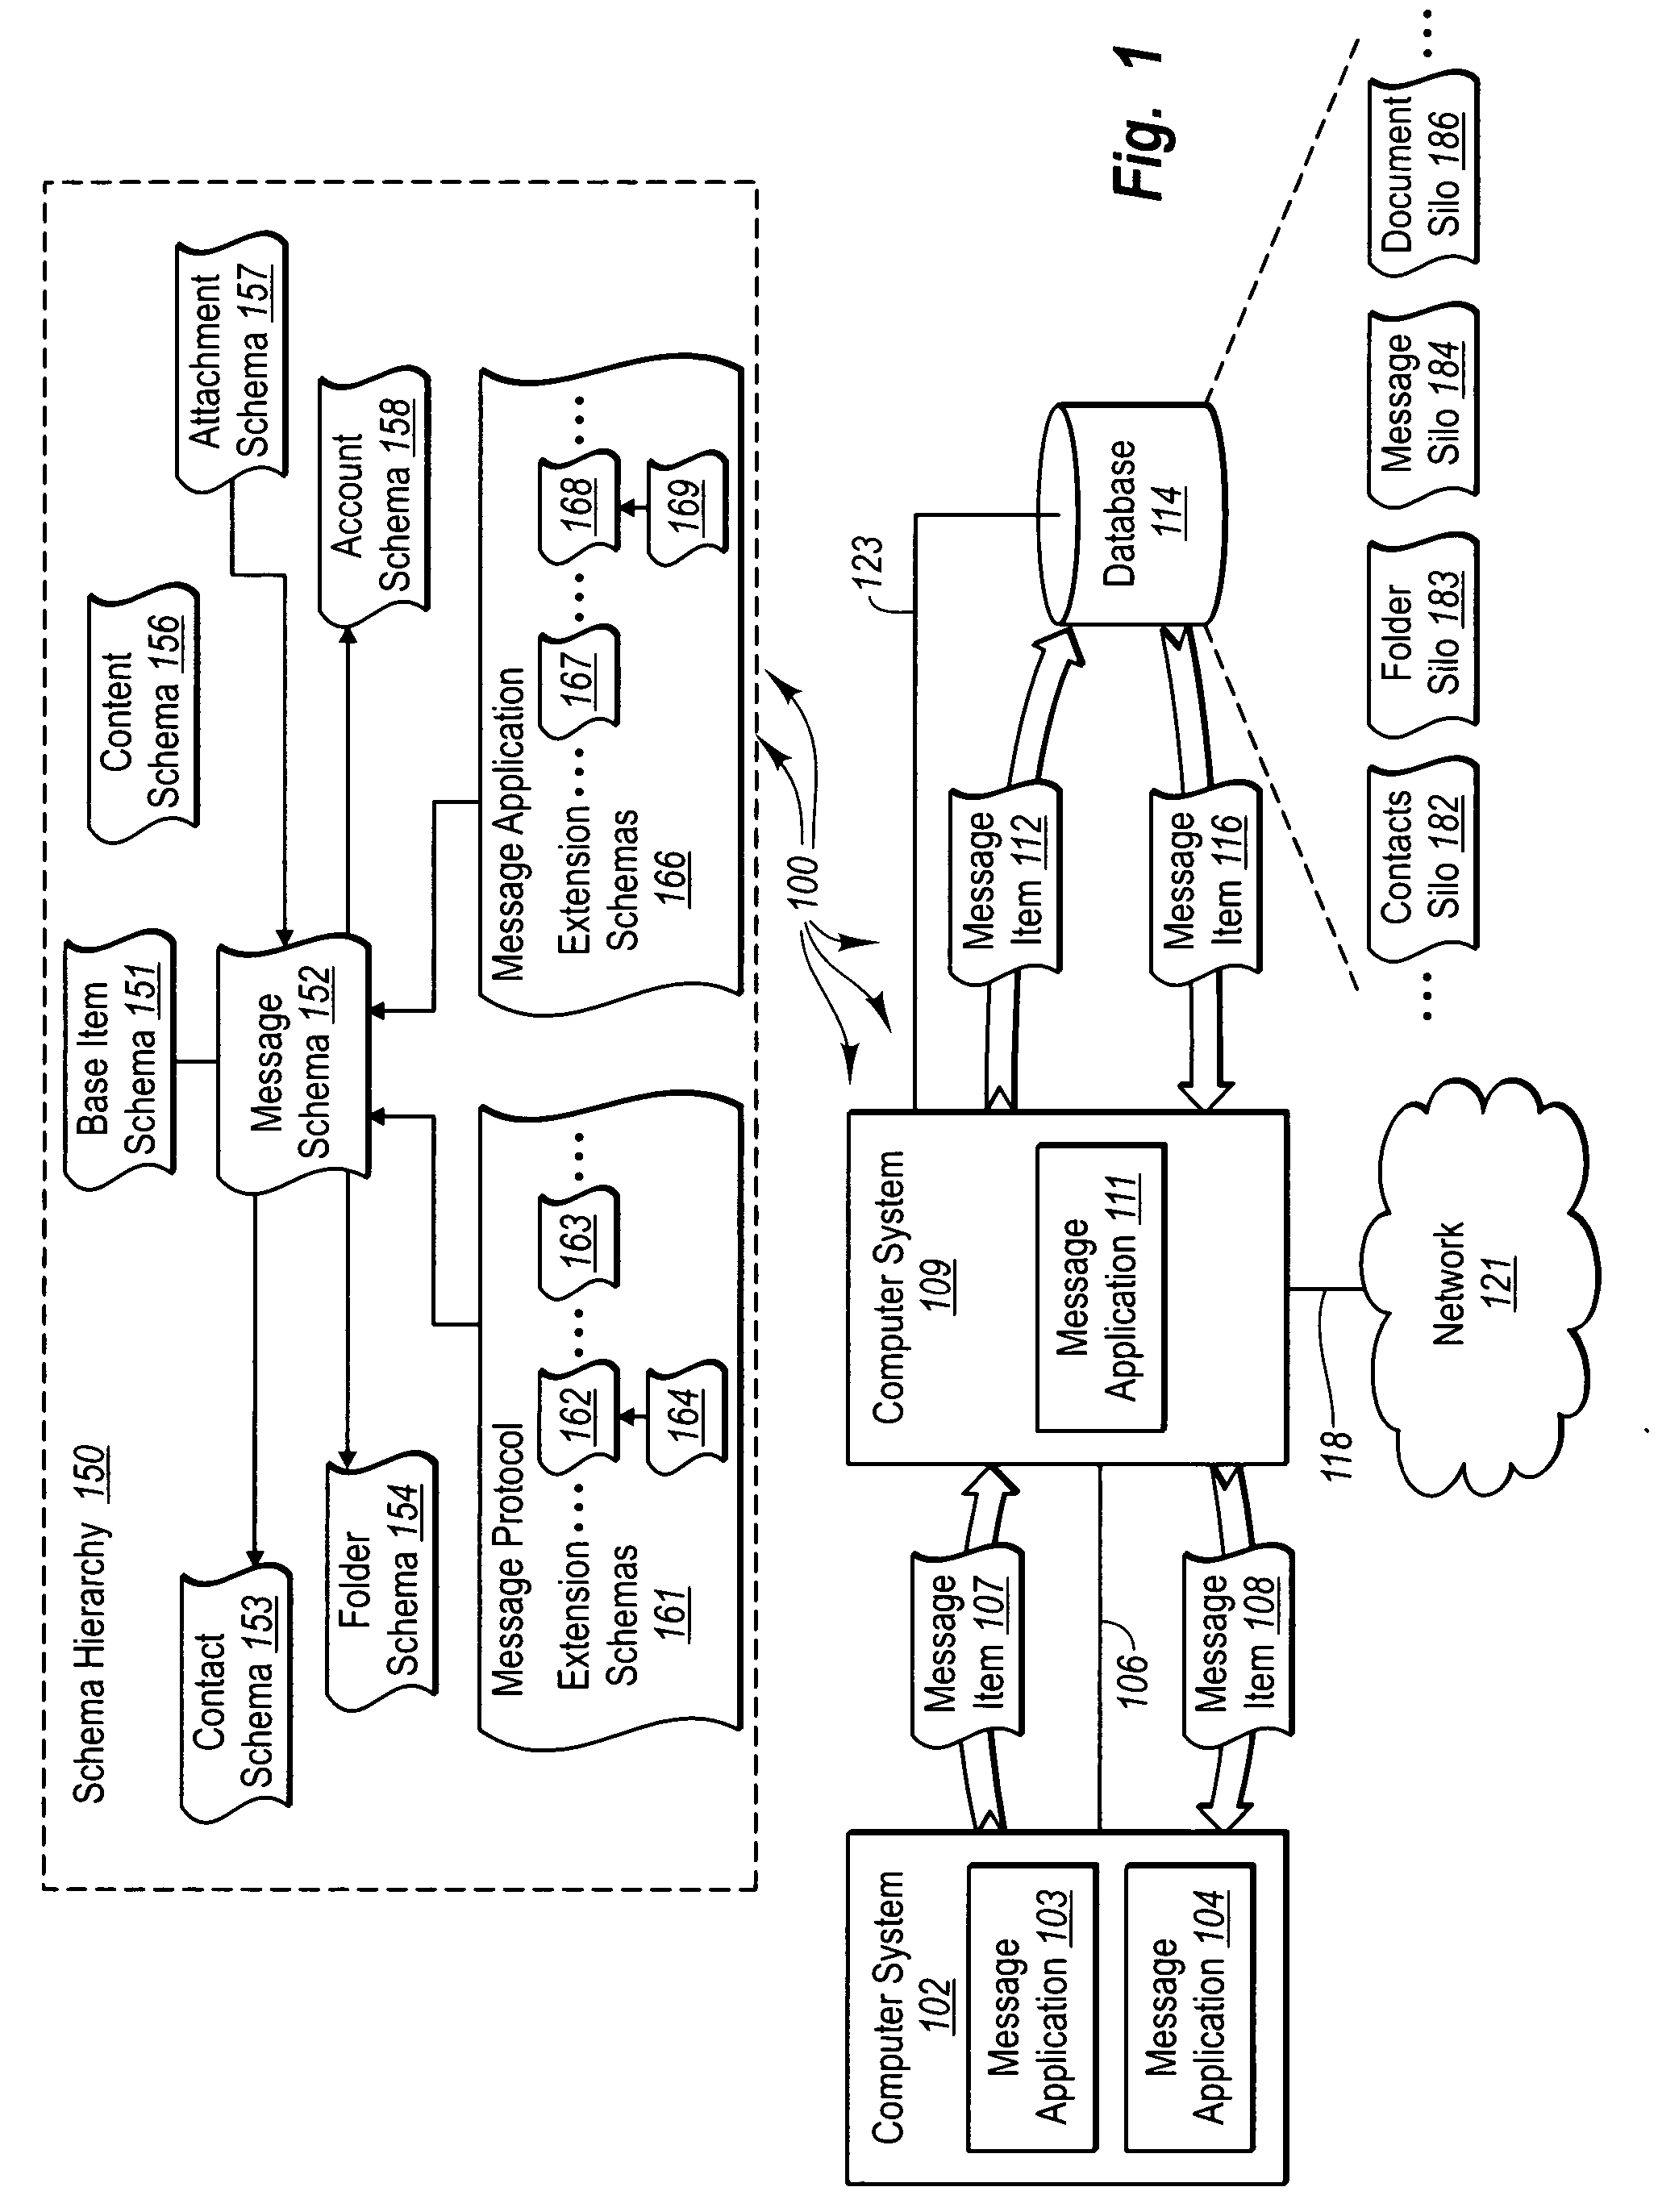 Schema hierarchy for electronic messages